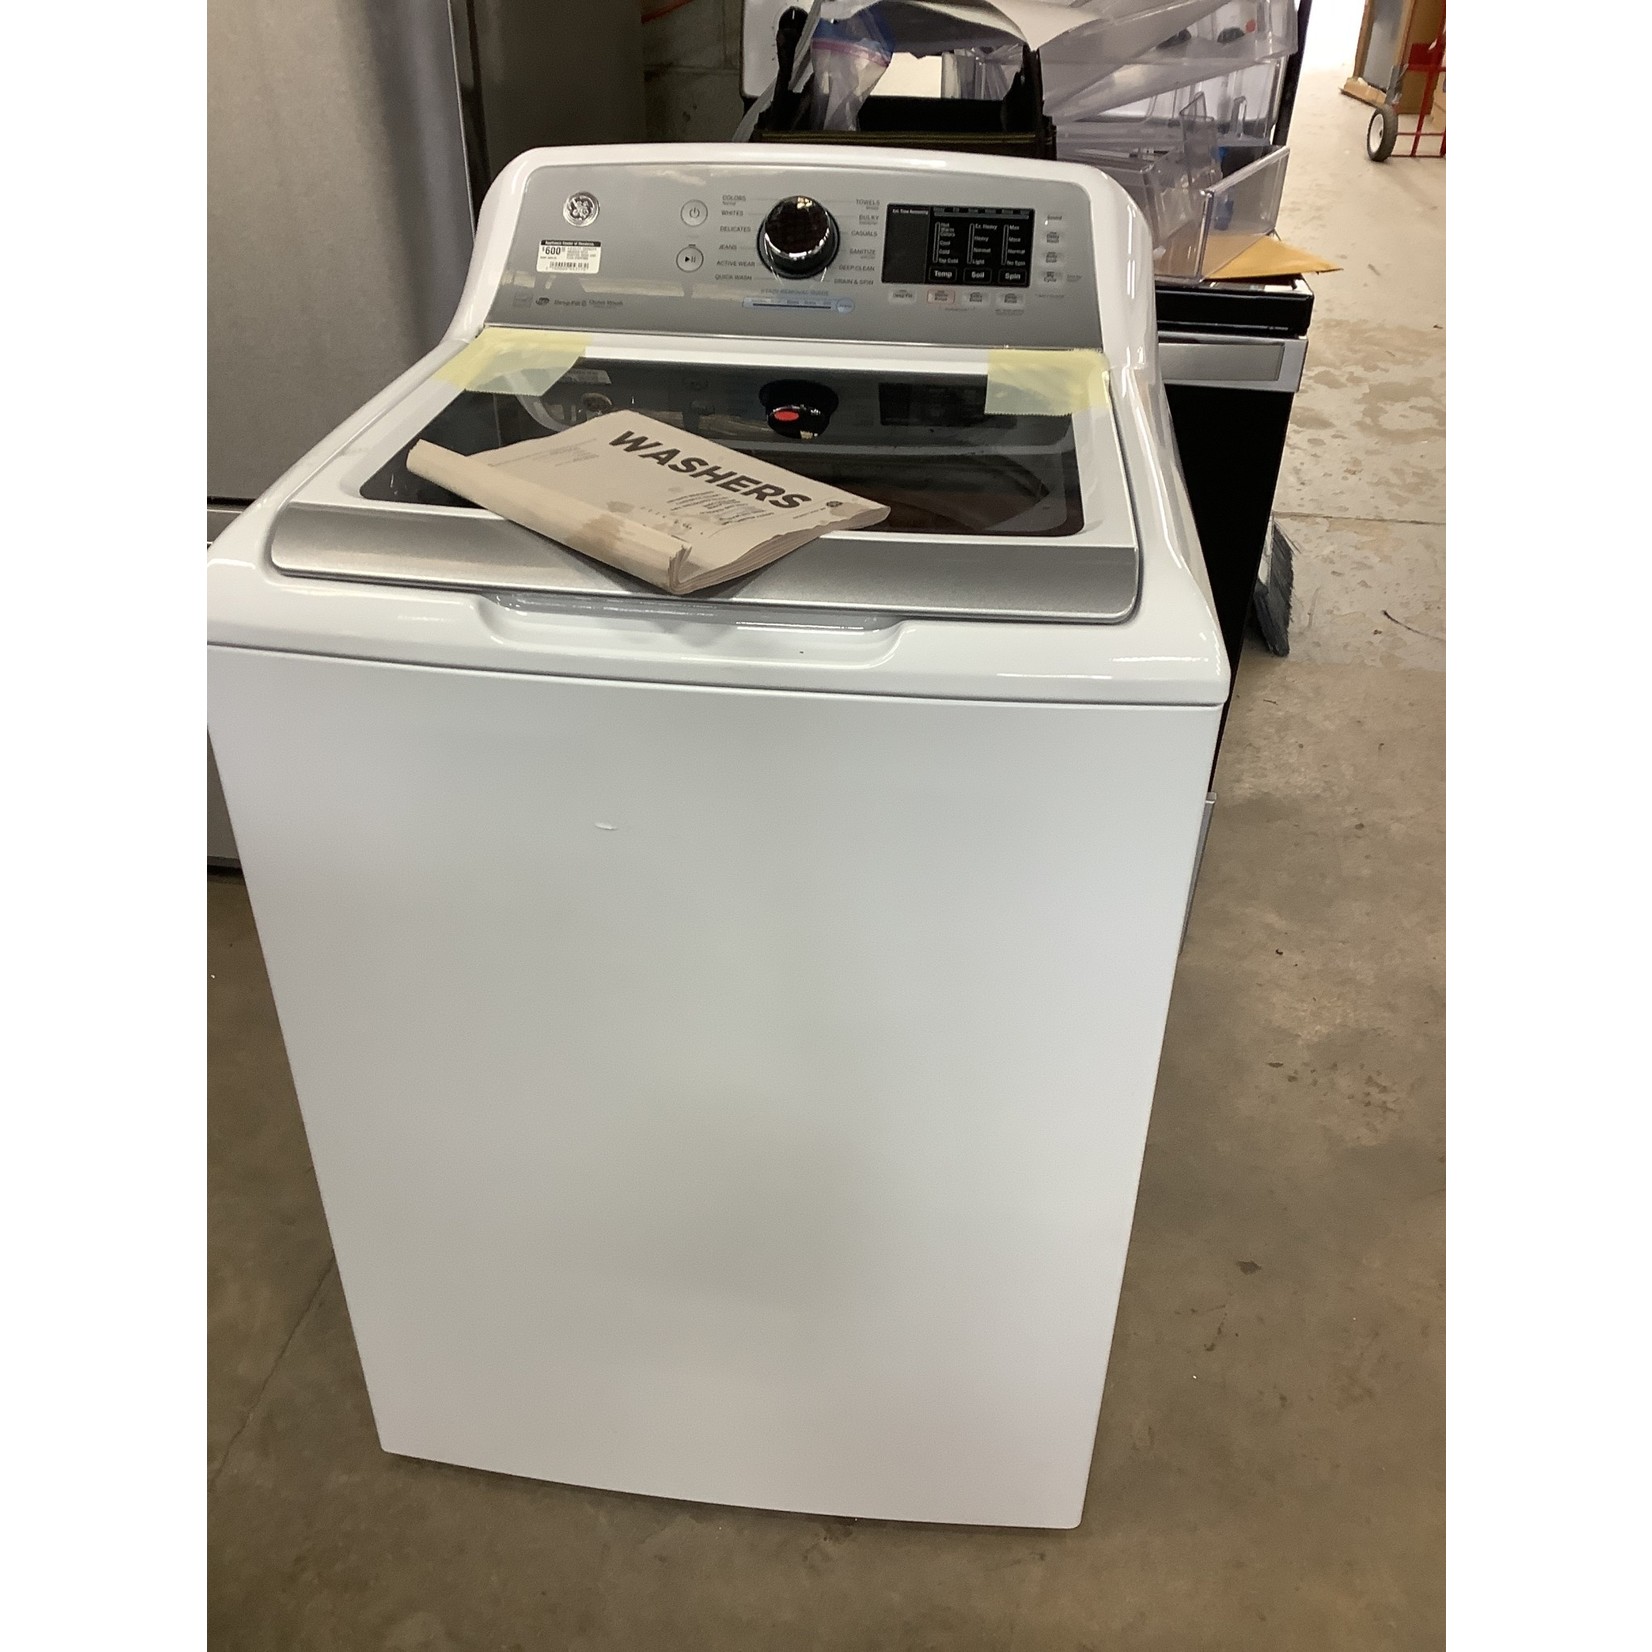 General Electric 4.8 CU.FT. CAPACITY WASHER WITH SANITIZE W/OXI AND FLEX DISPENSE